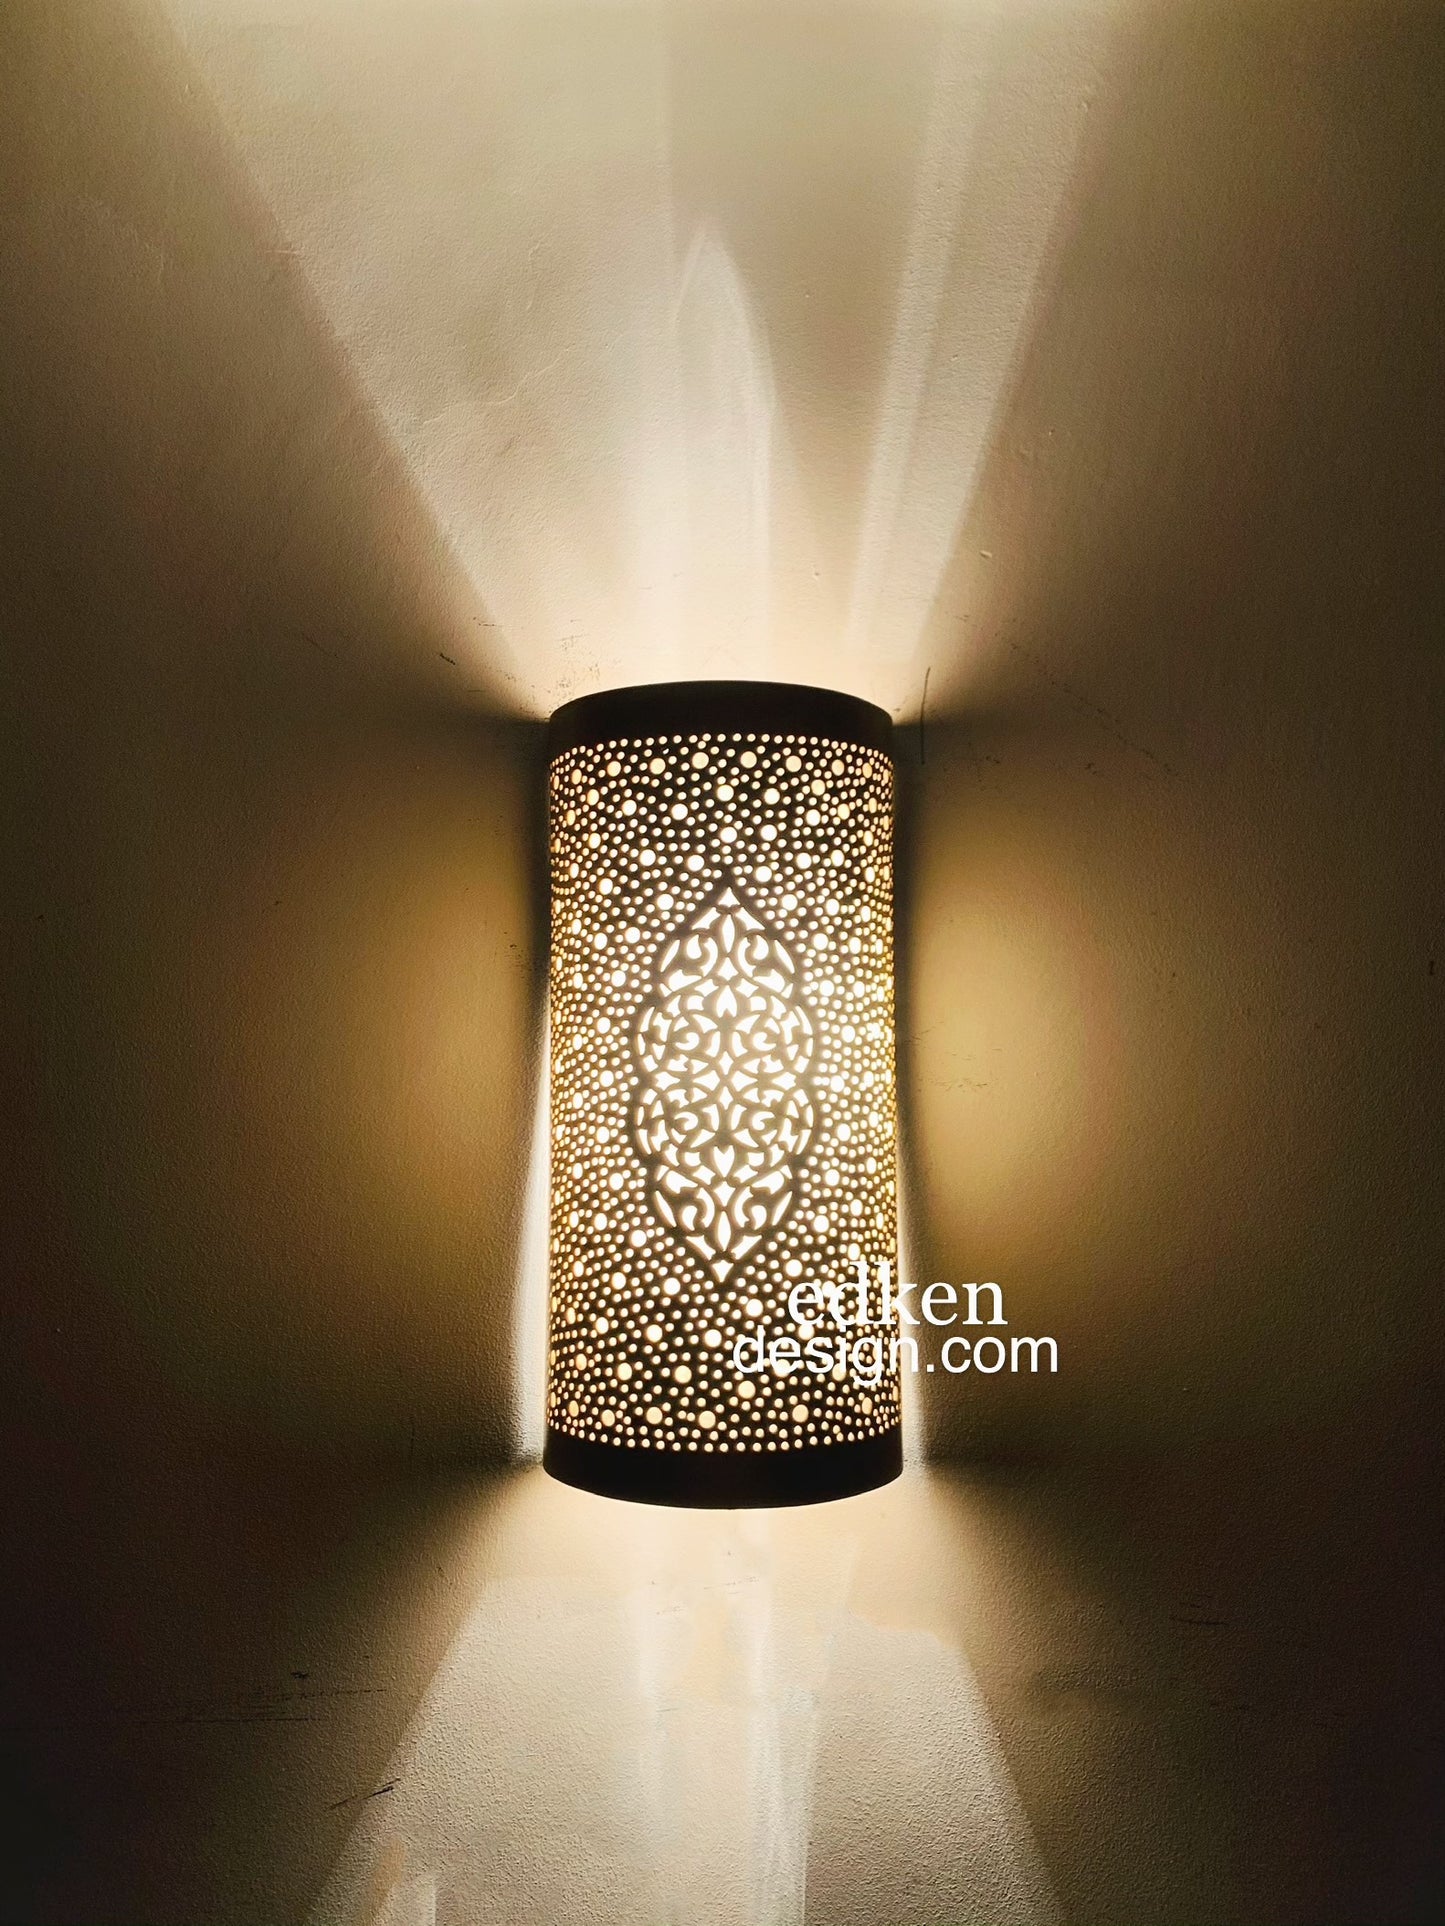 EDKEN LIGHTS - Moroccan Wall Lamps Sconce Fixture Morocco Wall Lights Handmade Brass lampshades Vintage Wall Design Home Decor